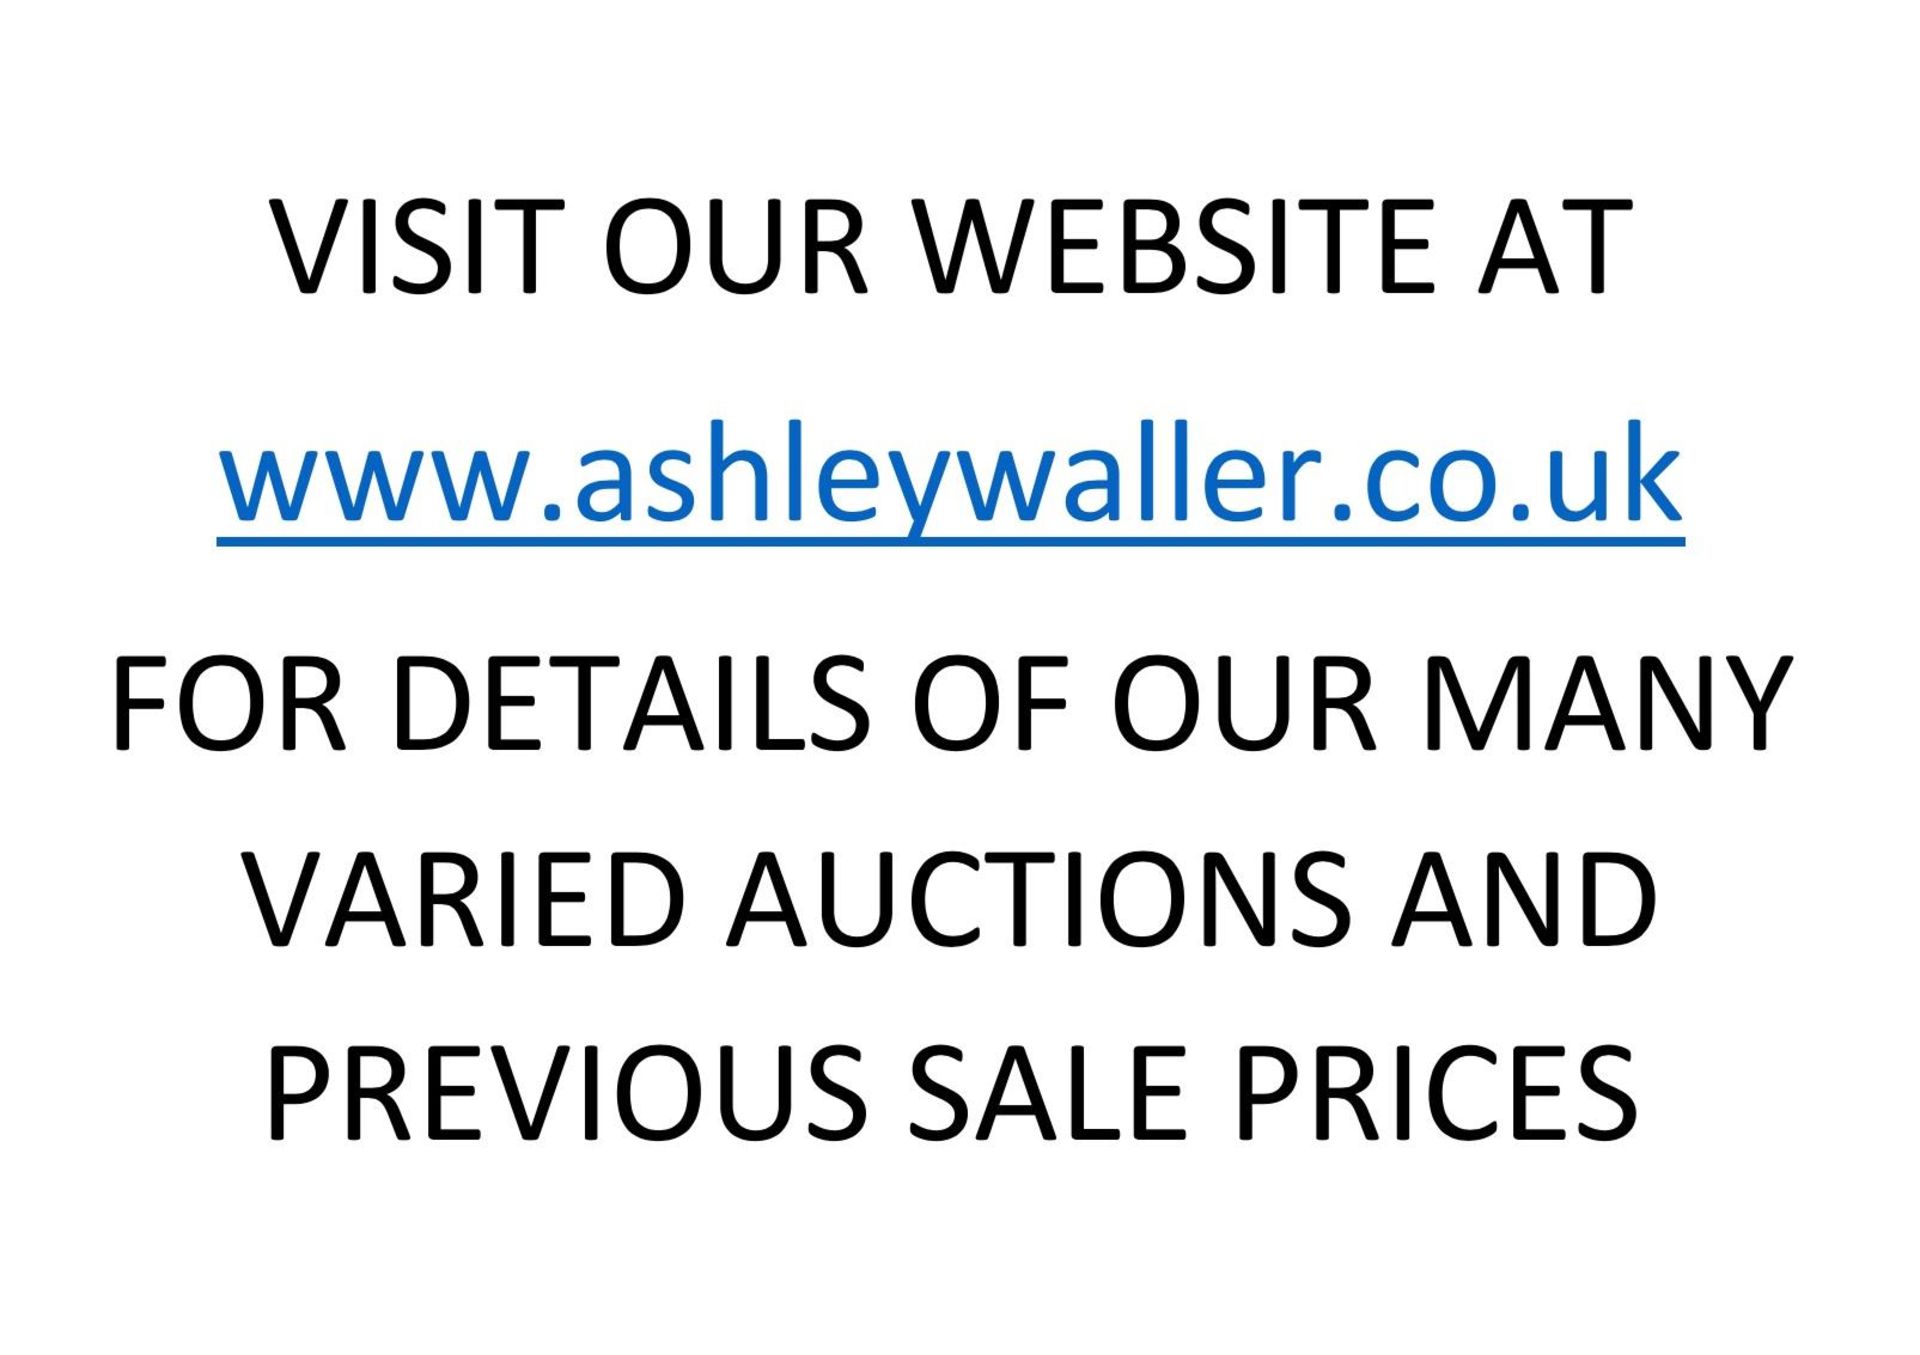 END OF SALE, THANK YOU FOR YOUR BIDDING. OUR NEXT SALE IS ON THE 7TH & 8TH JUNE 2023